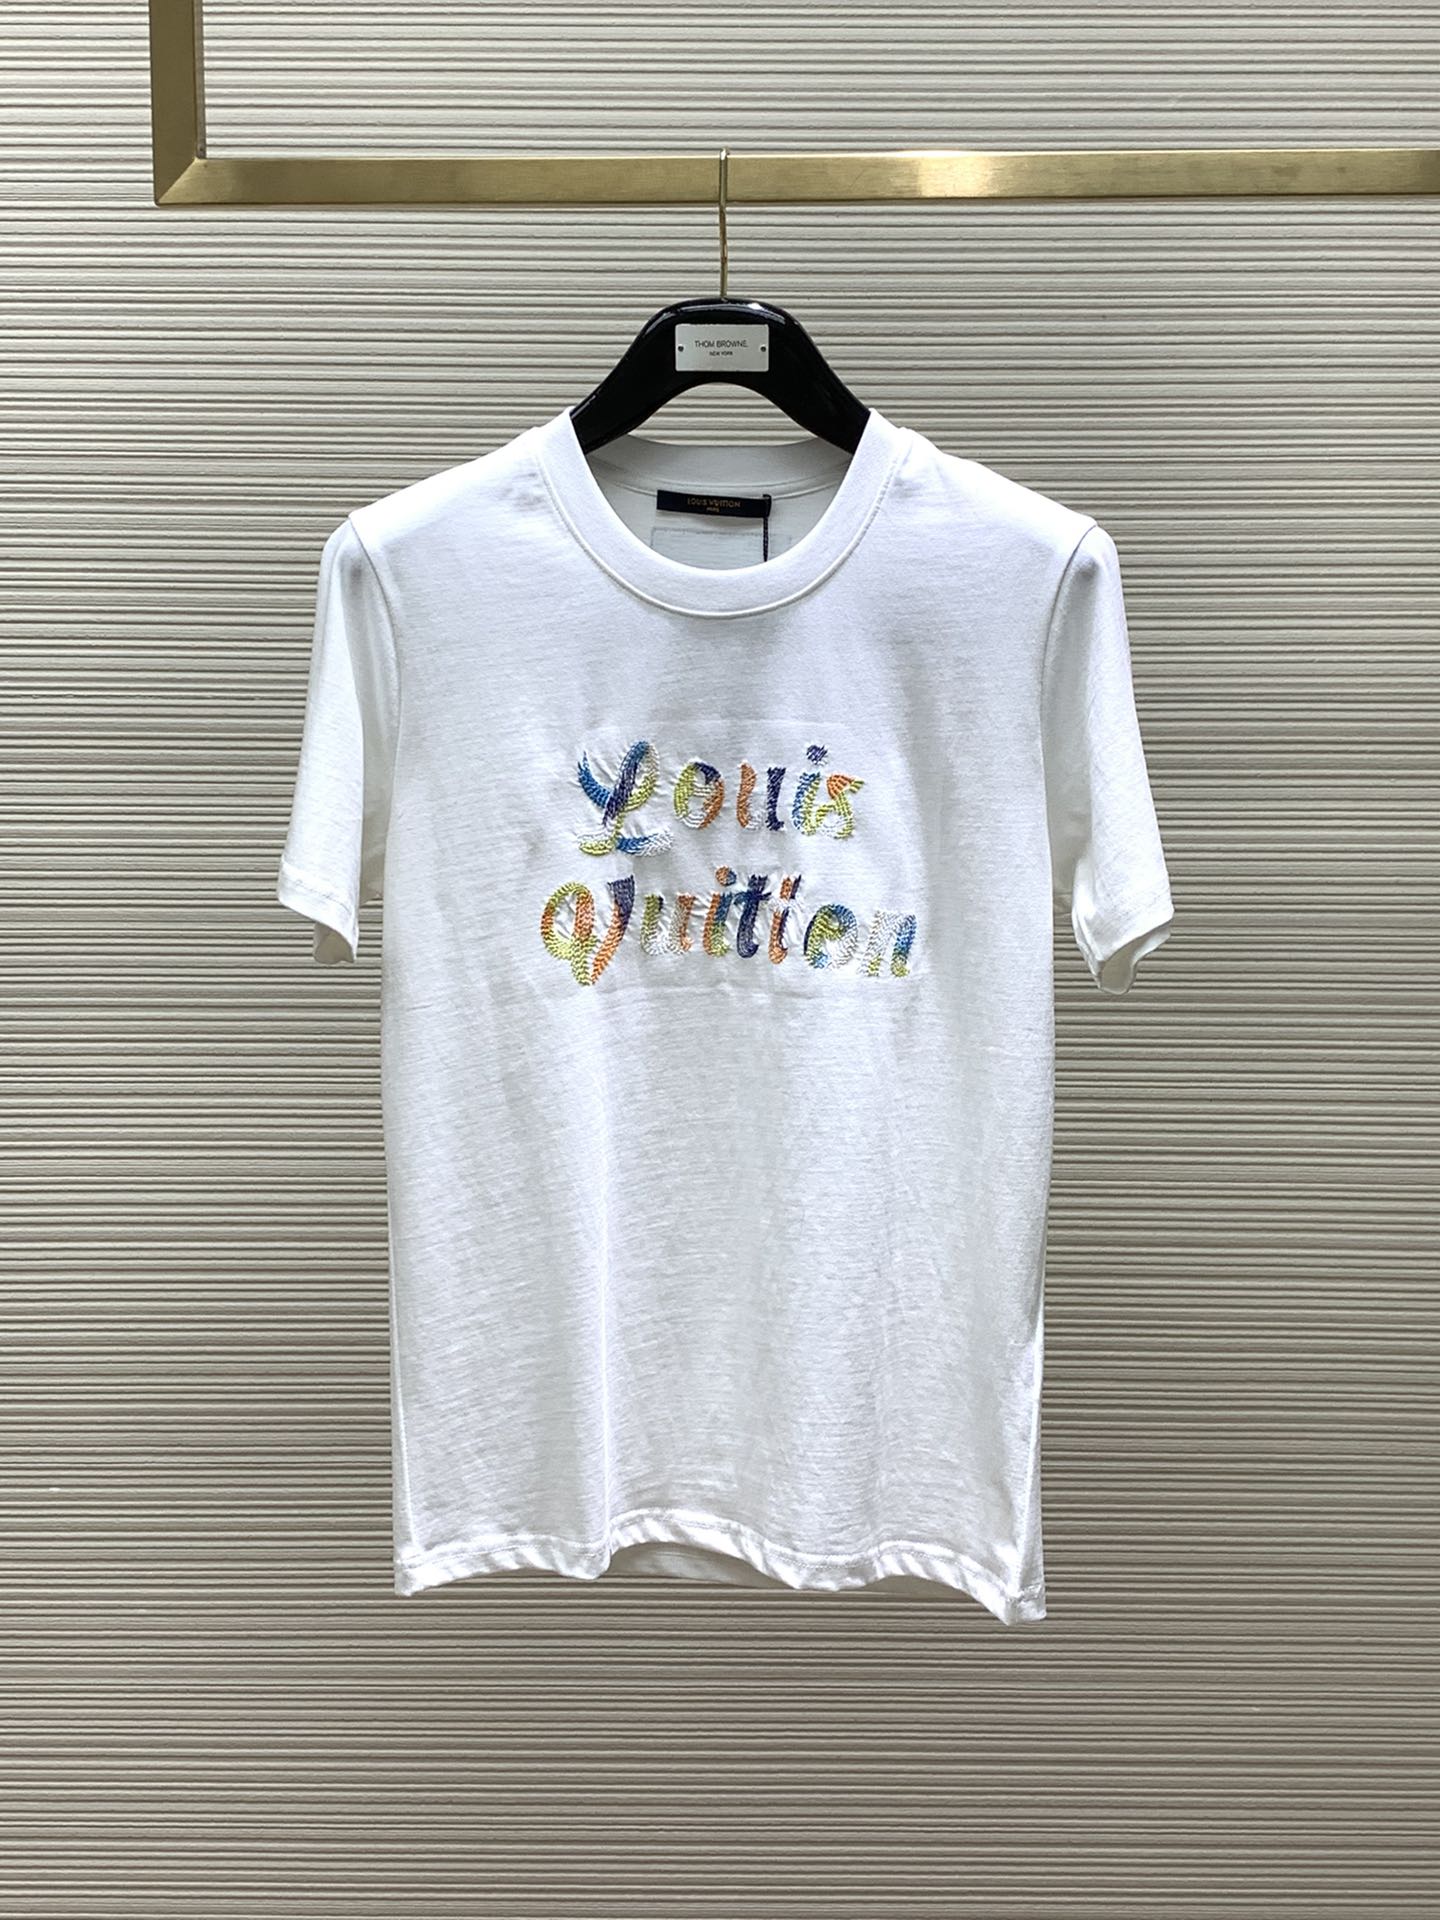 Louis Vuitton Clothing T-Shirt Embroidery Summer Collection Fashion Short Sleeve